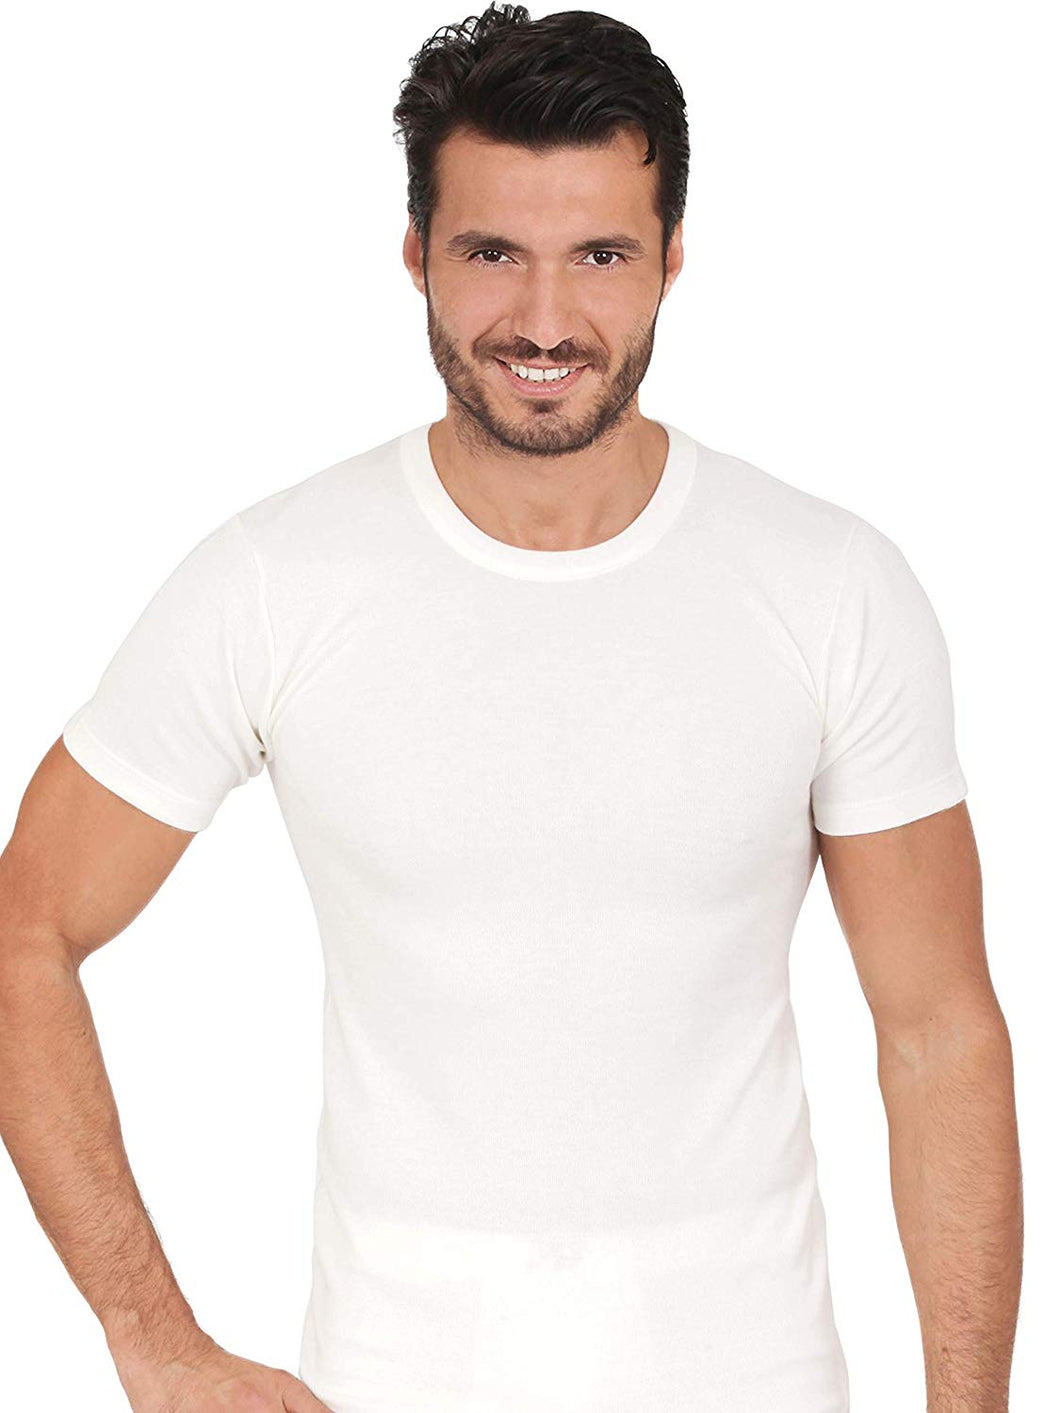 MaRe Premium Quality Cotton Wool Blend Men's V-Neck Neck T-Shirt. Proudly Made in Italy.